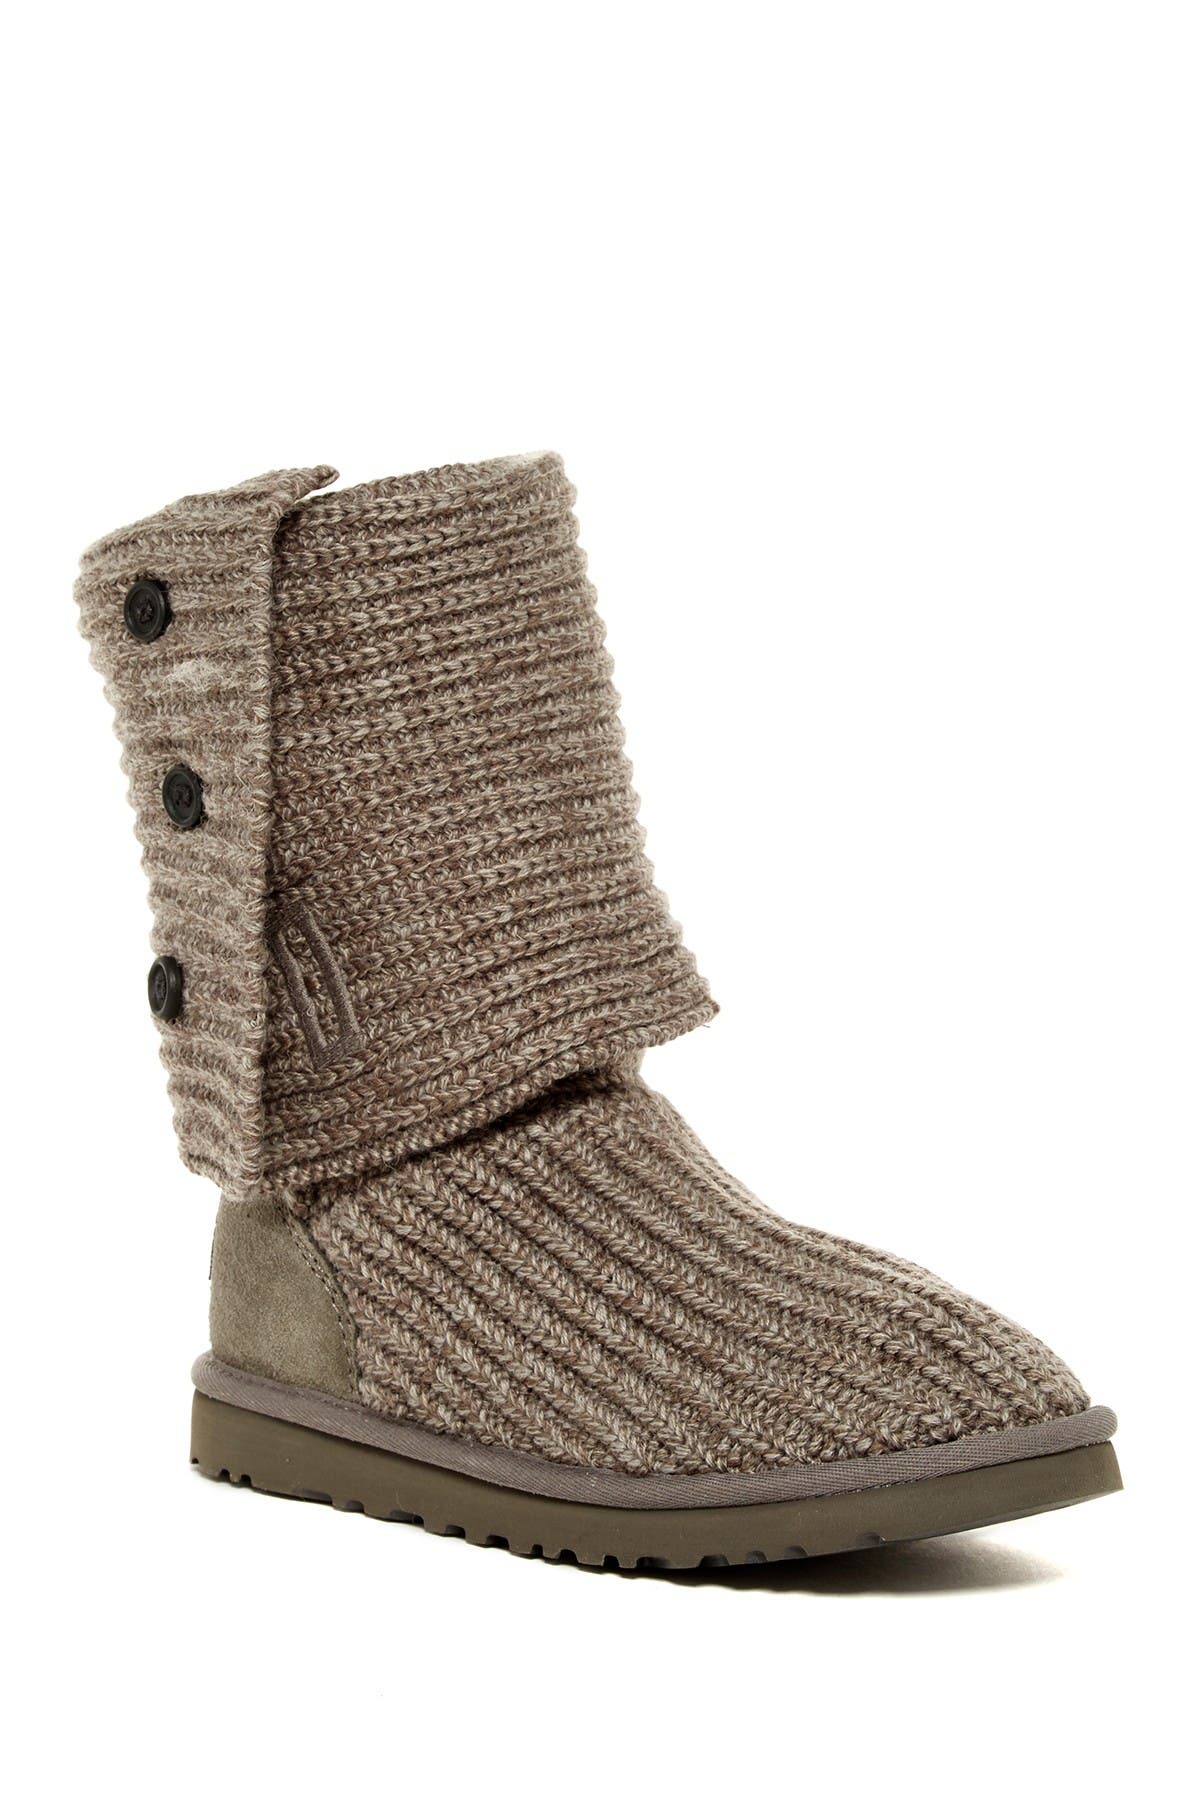 brown cardy ugg boots